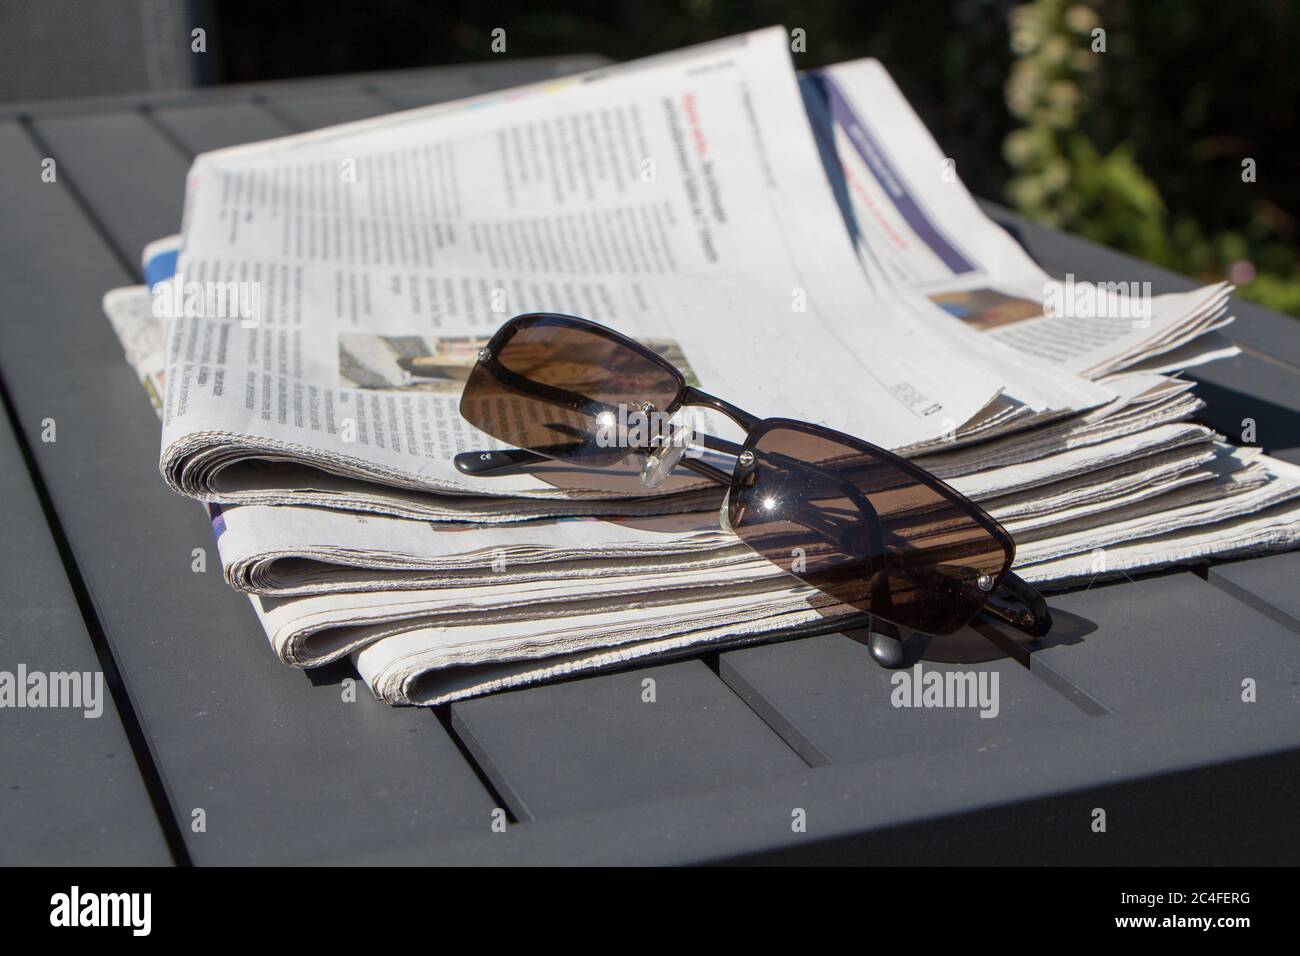 PRIMELIN - FRANCE, JULY 11 : Pile of newspapers and sunglasses on a table in a garden, July 11, 2018 Stock Photo